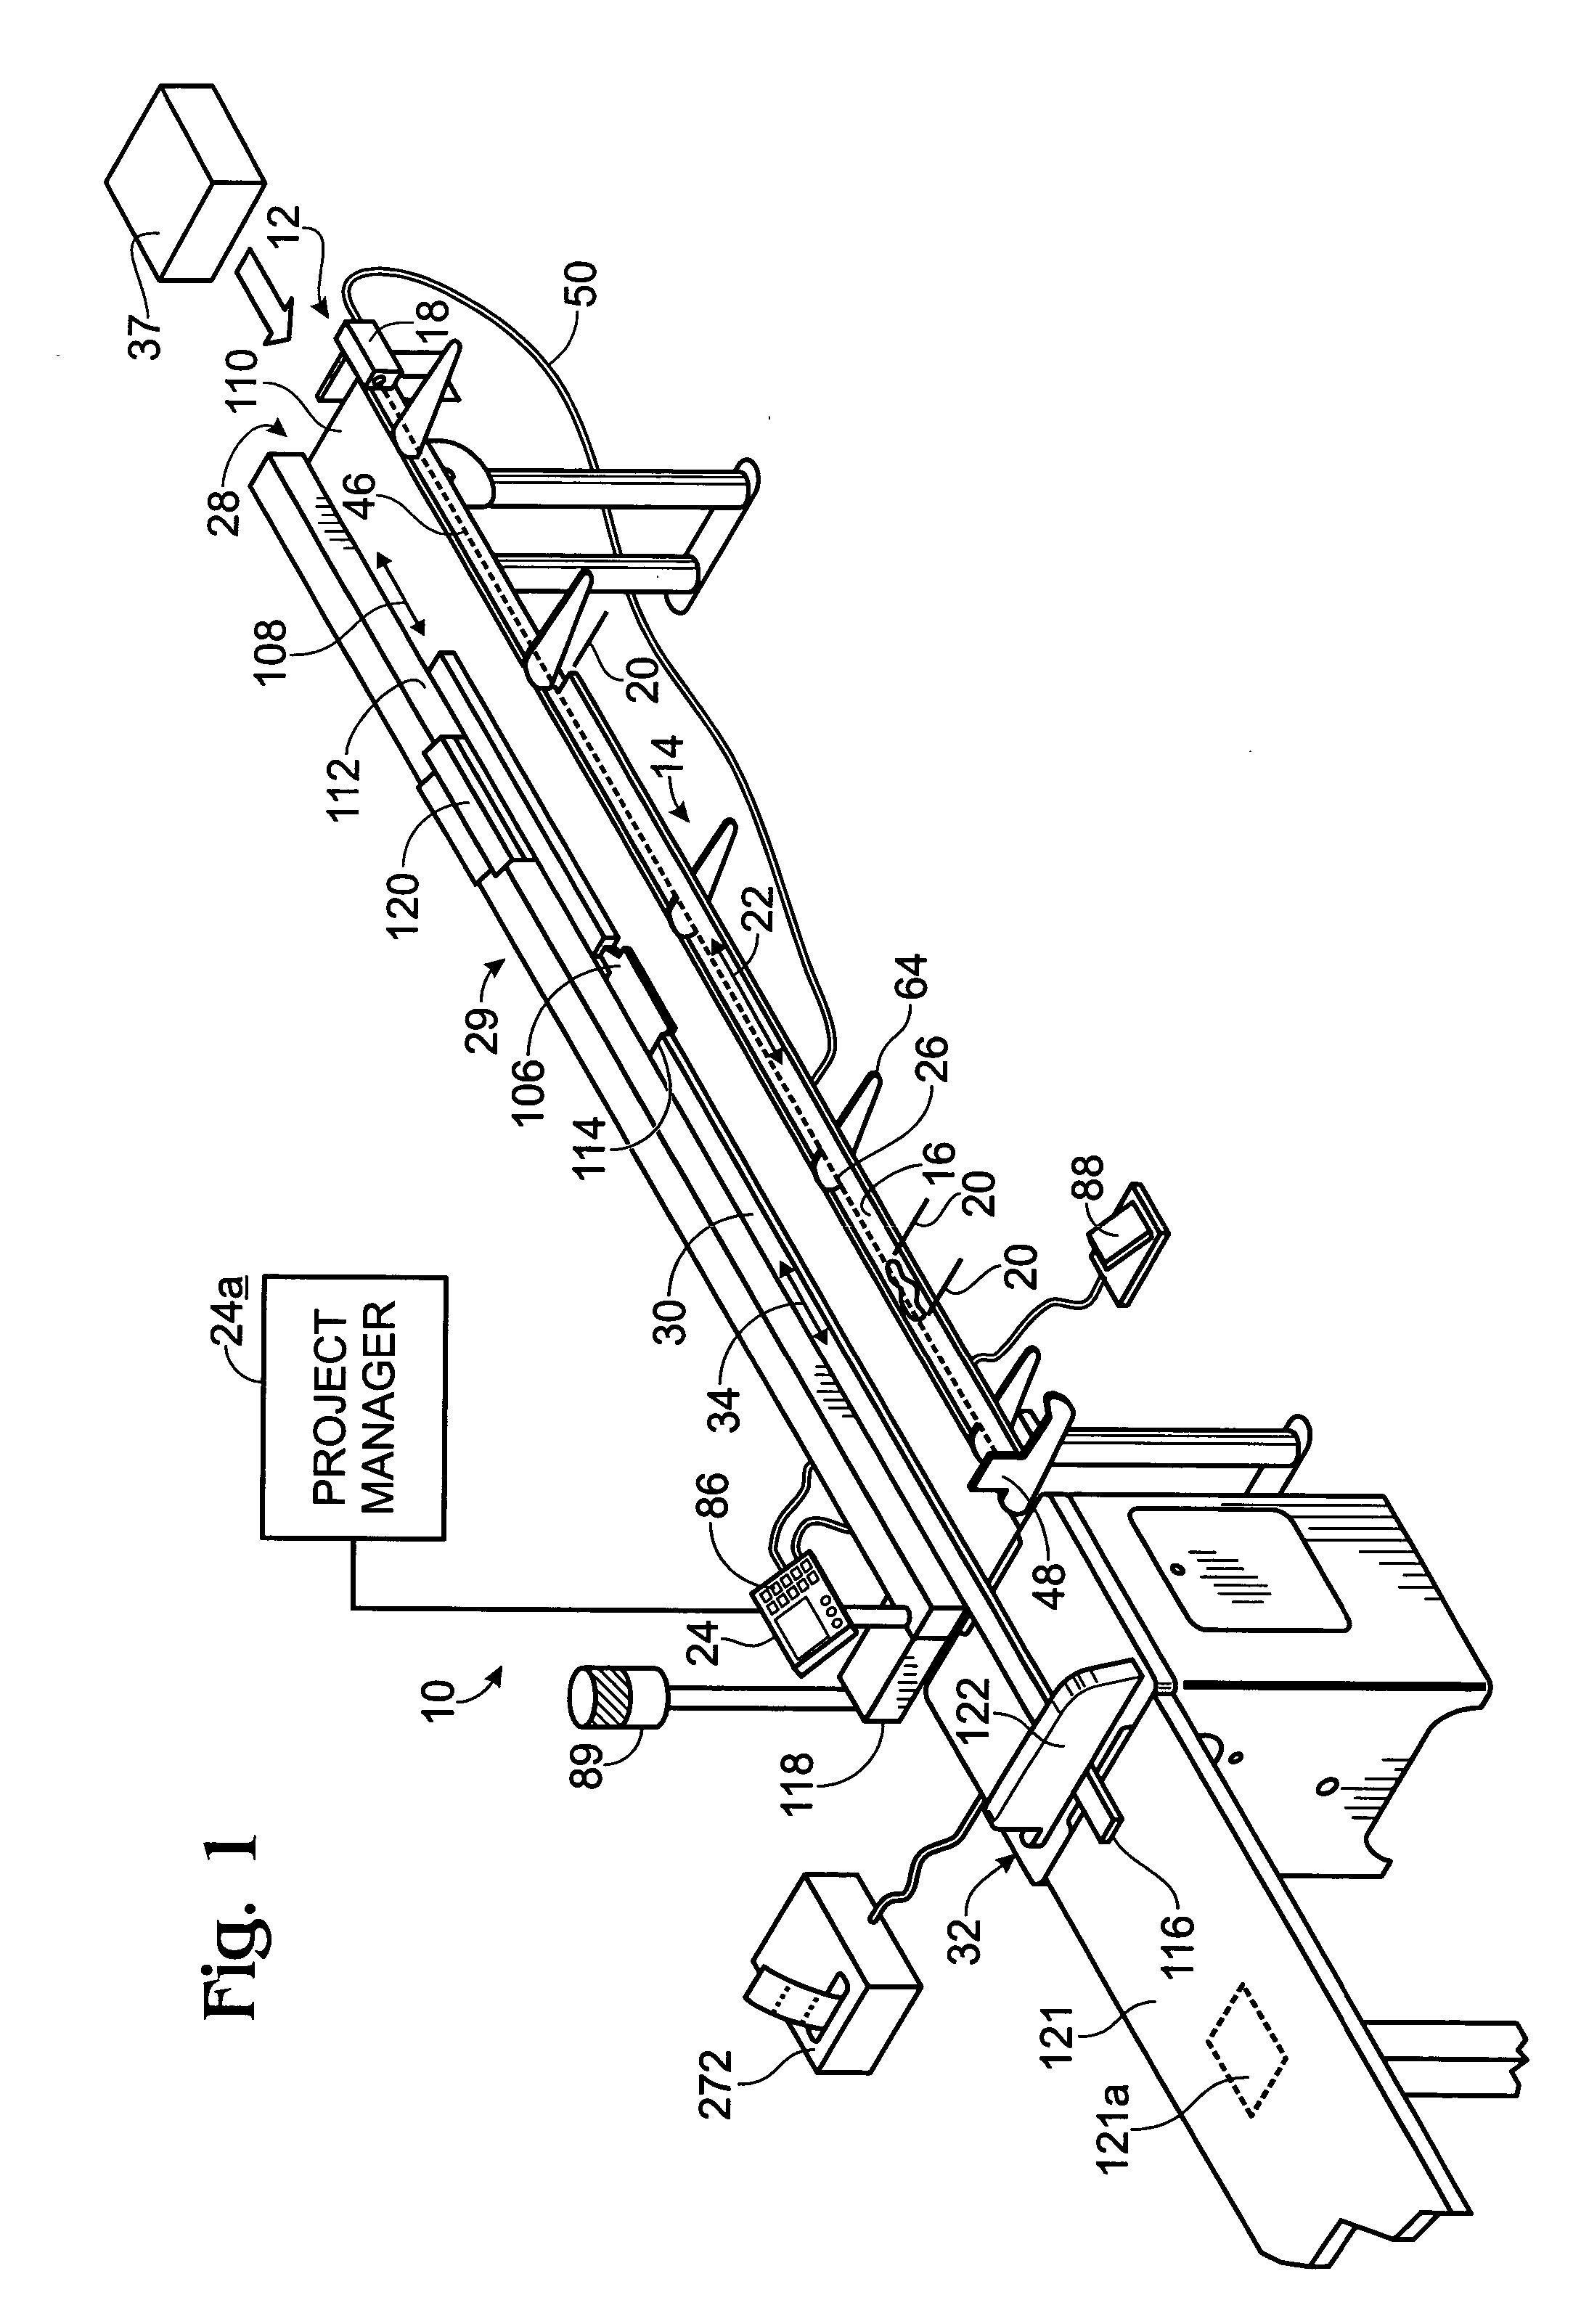 Systems and methods for automated material processing